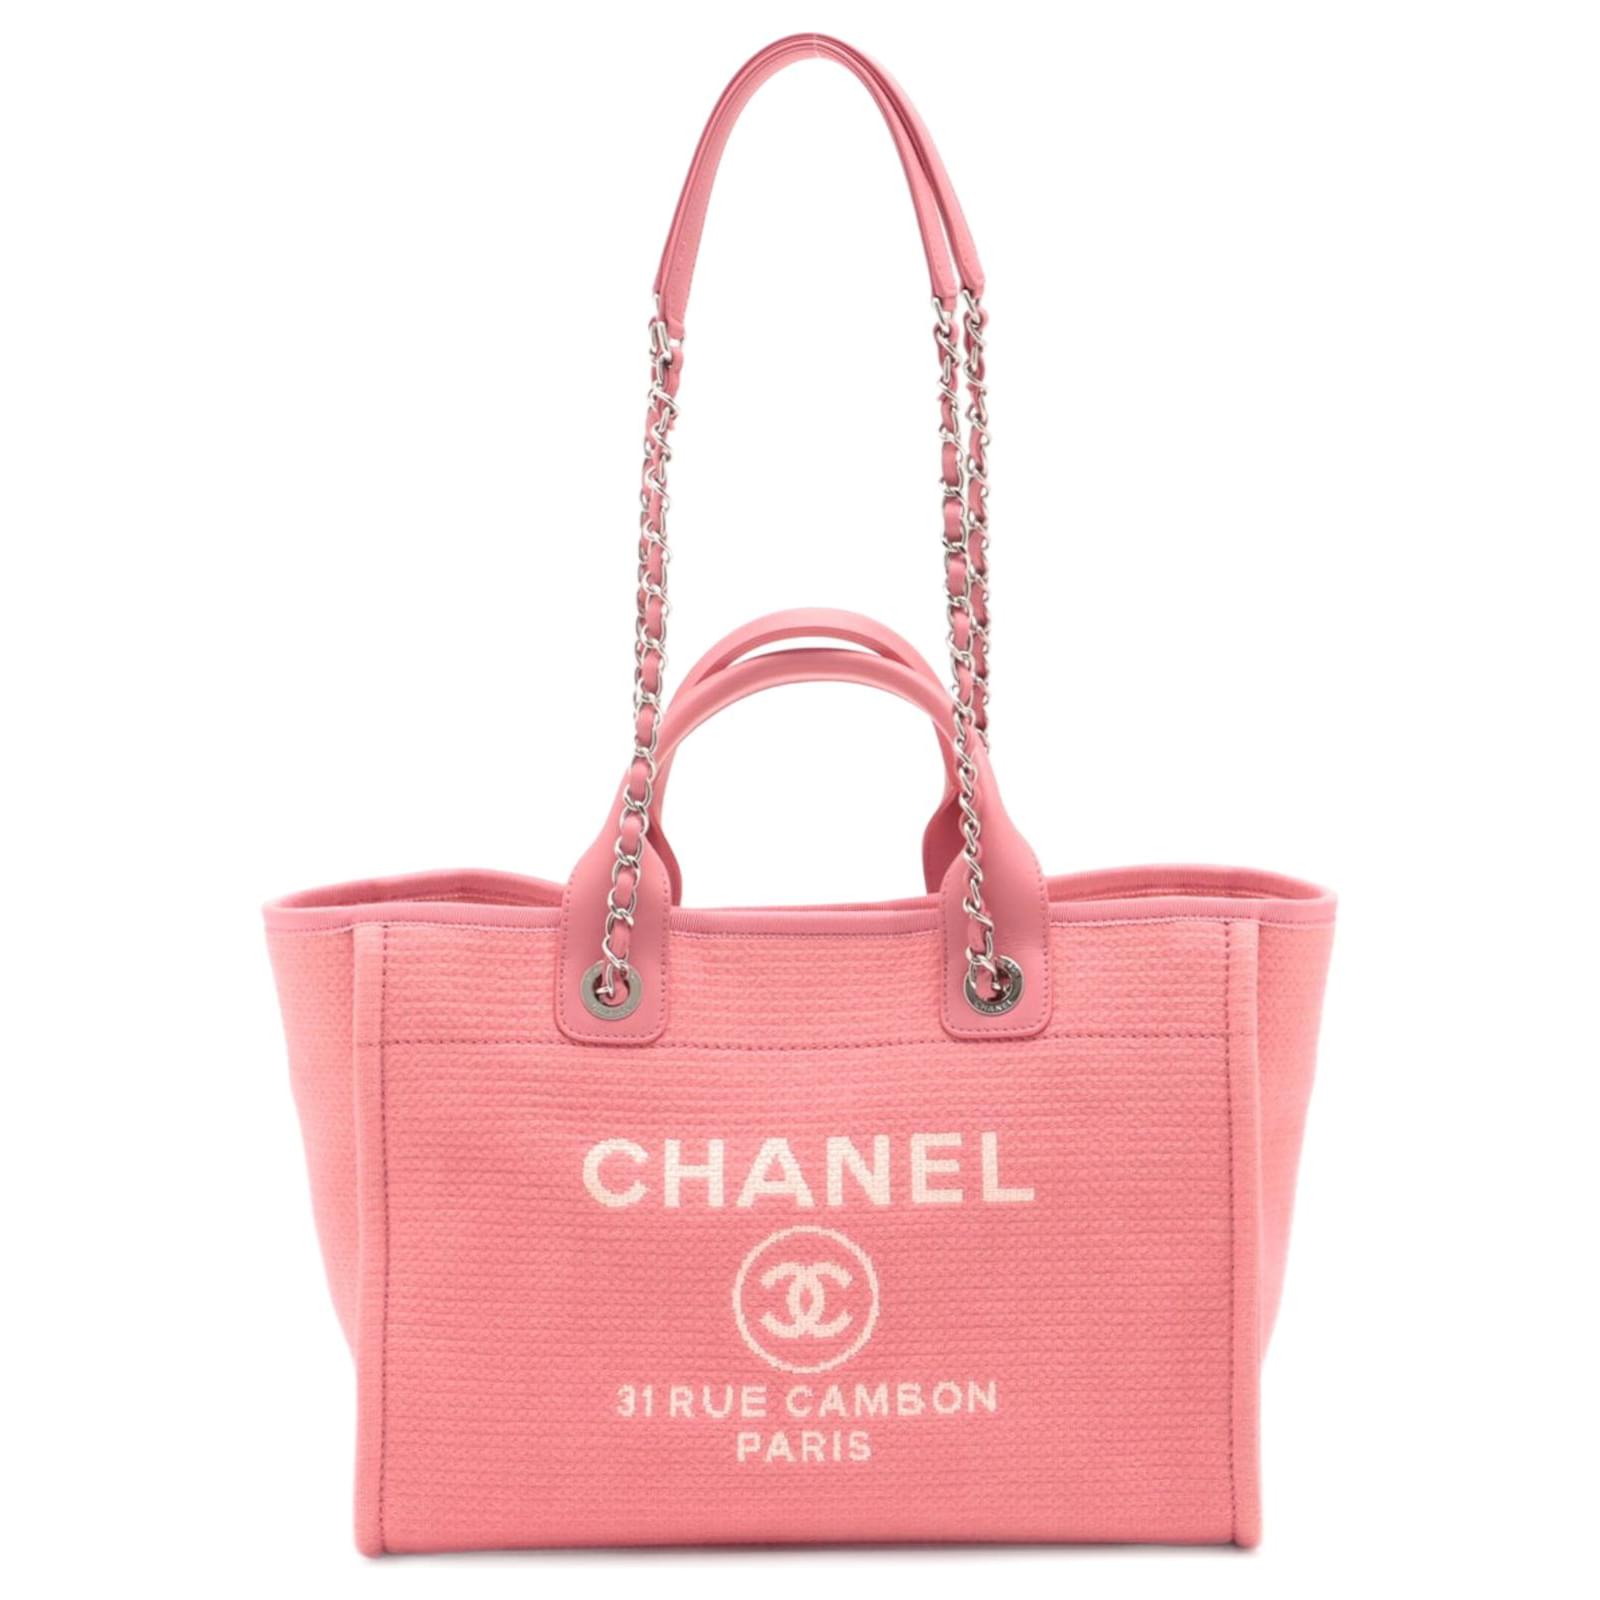 Chanel Red Canvas Medium Deauville Tote